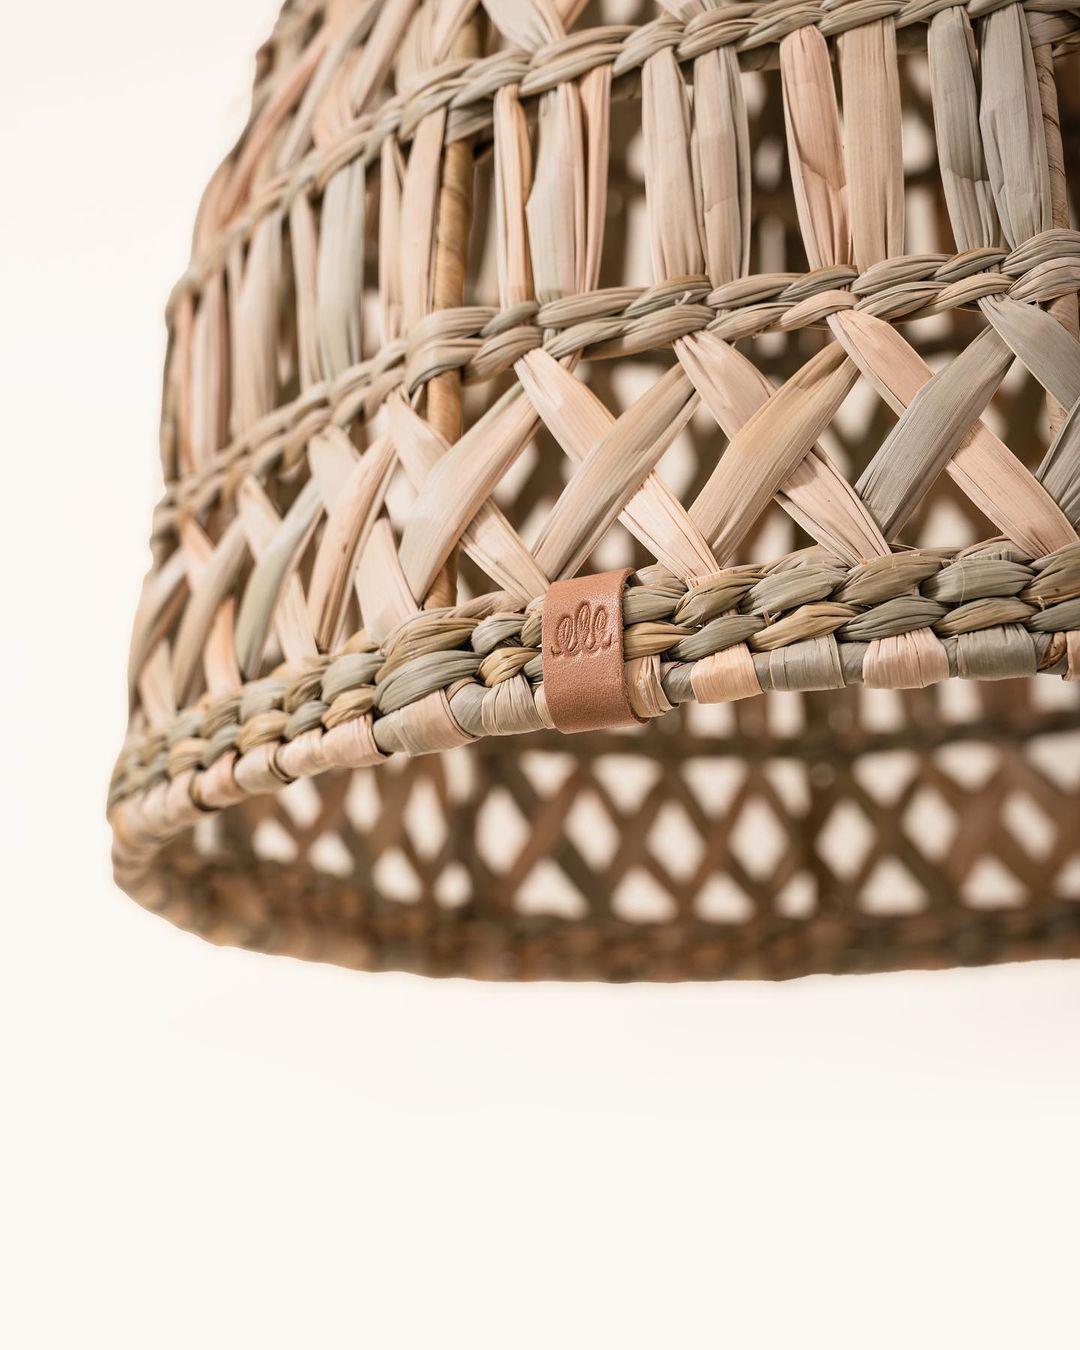 Rattan Maruata Handwoven Dried Palm Pendant Lampshade For Sale